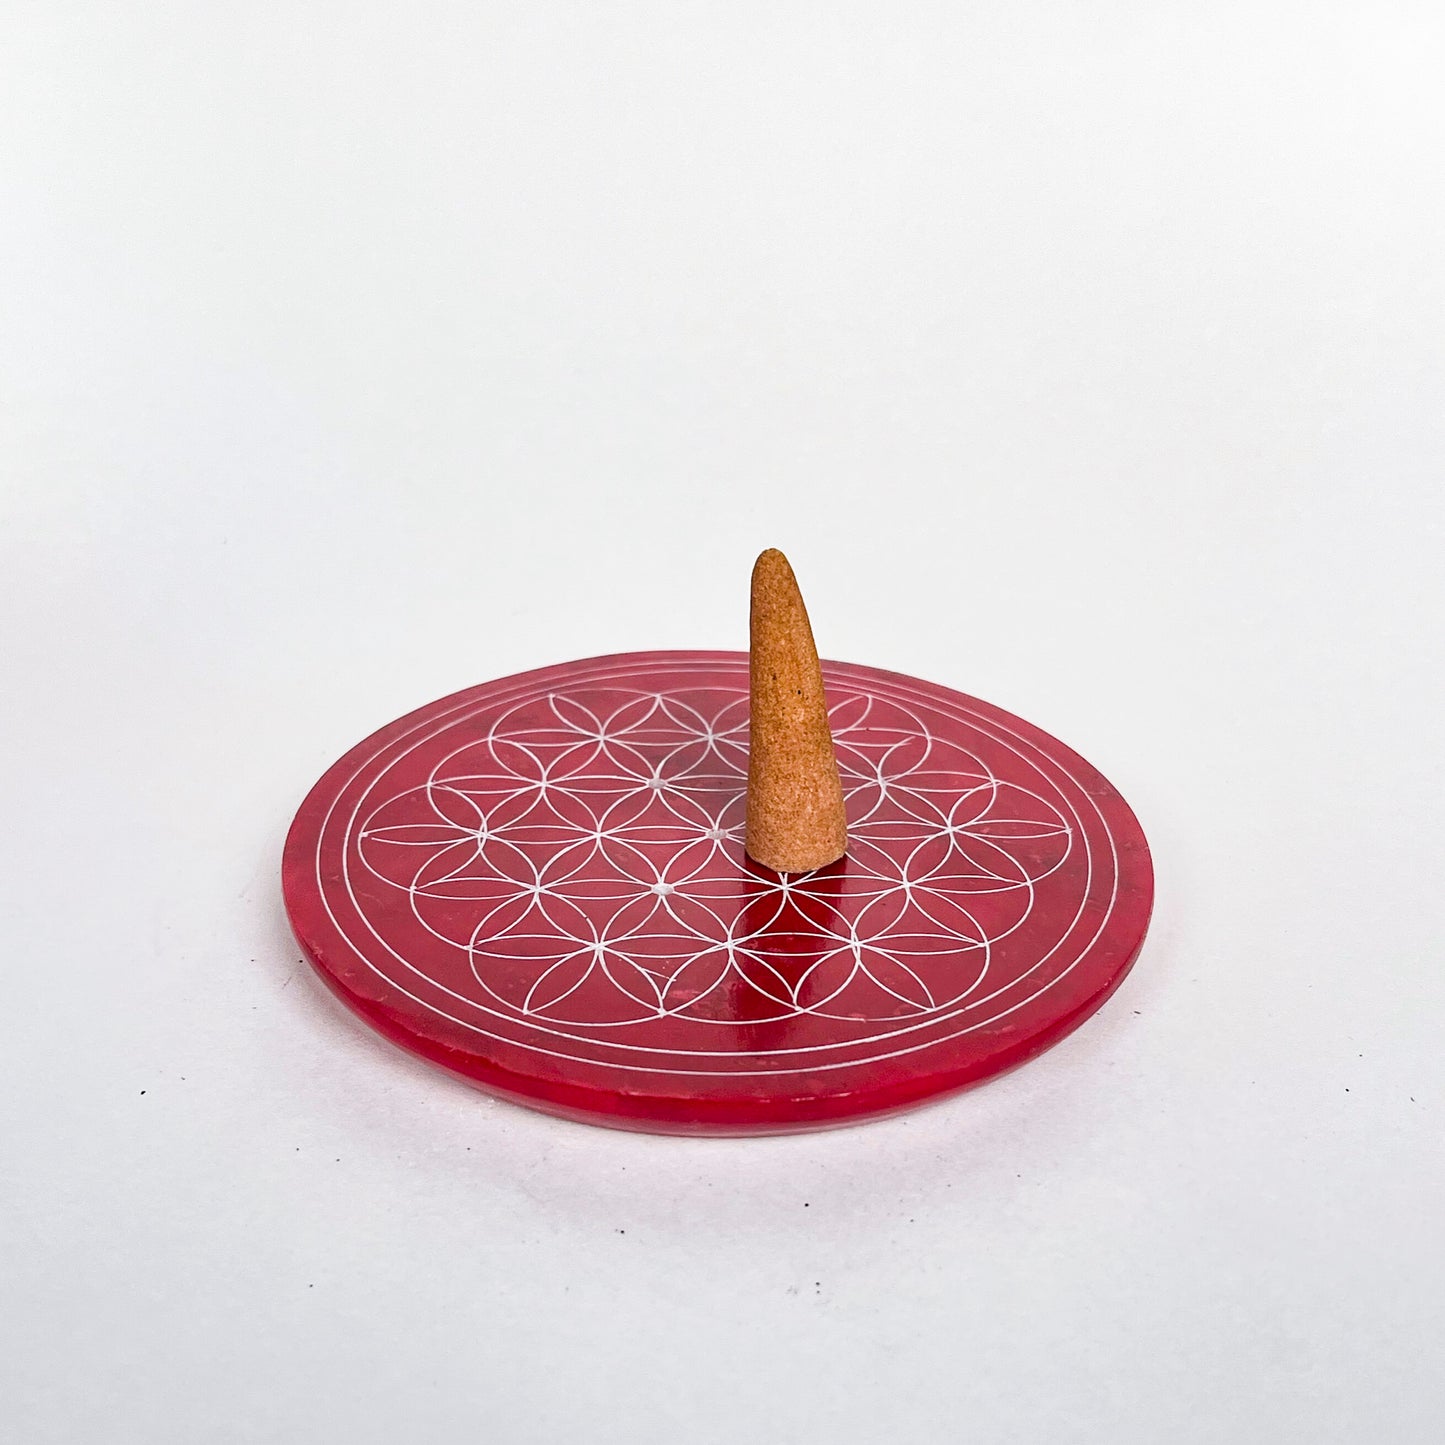 Flower of Life Incense Holder - Berry Red